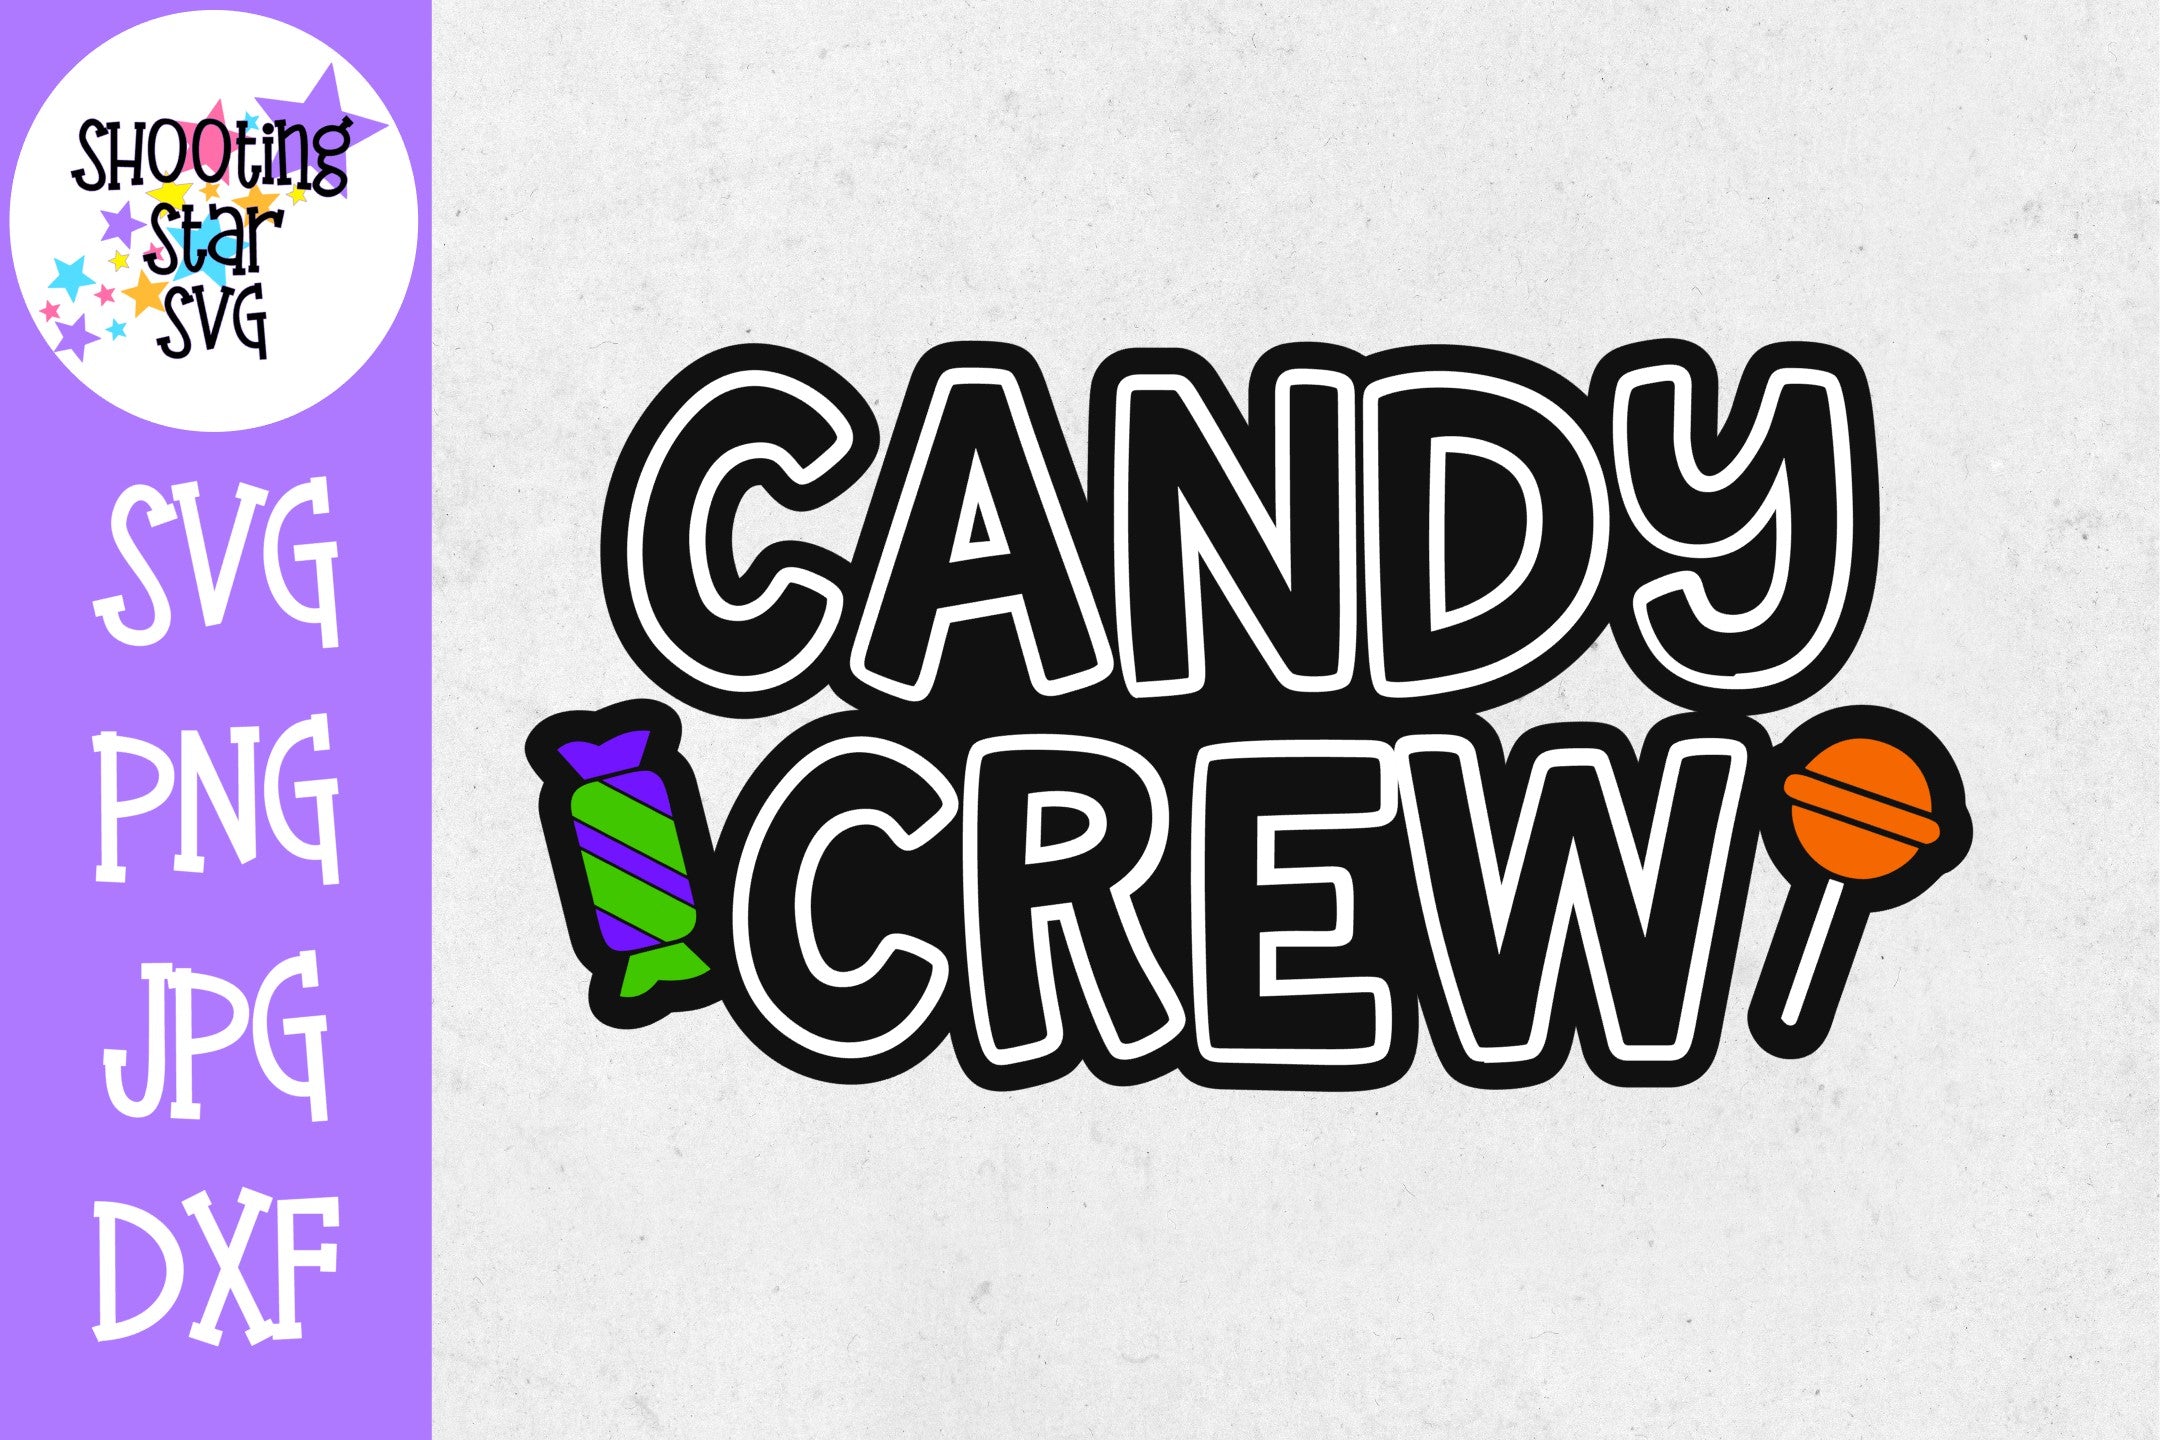 The Candy Crew SVG - Candy SVG - Halloween SVG